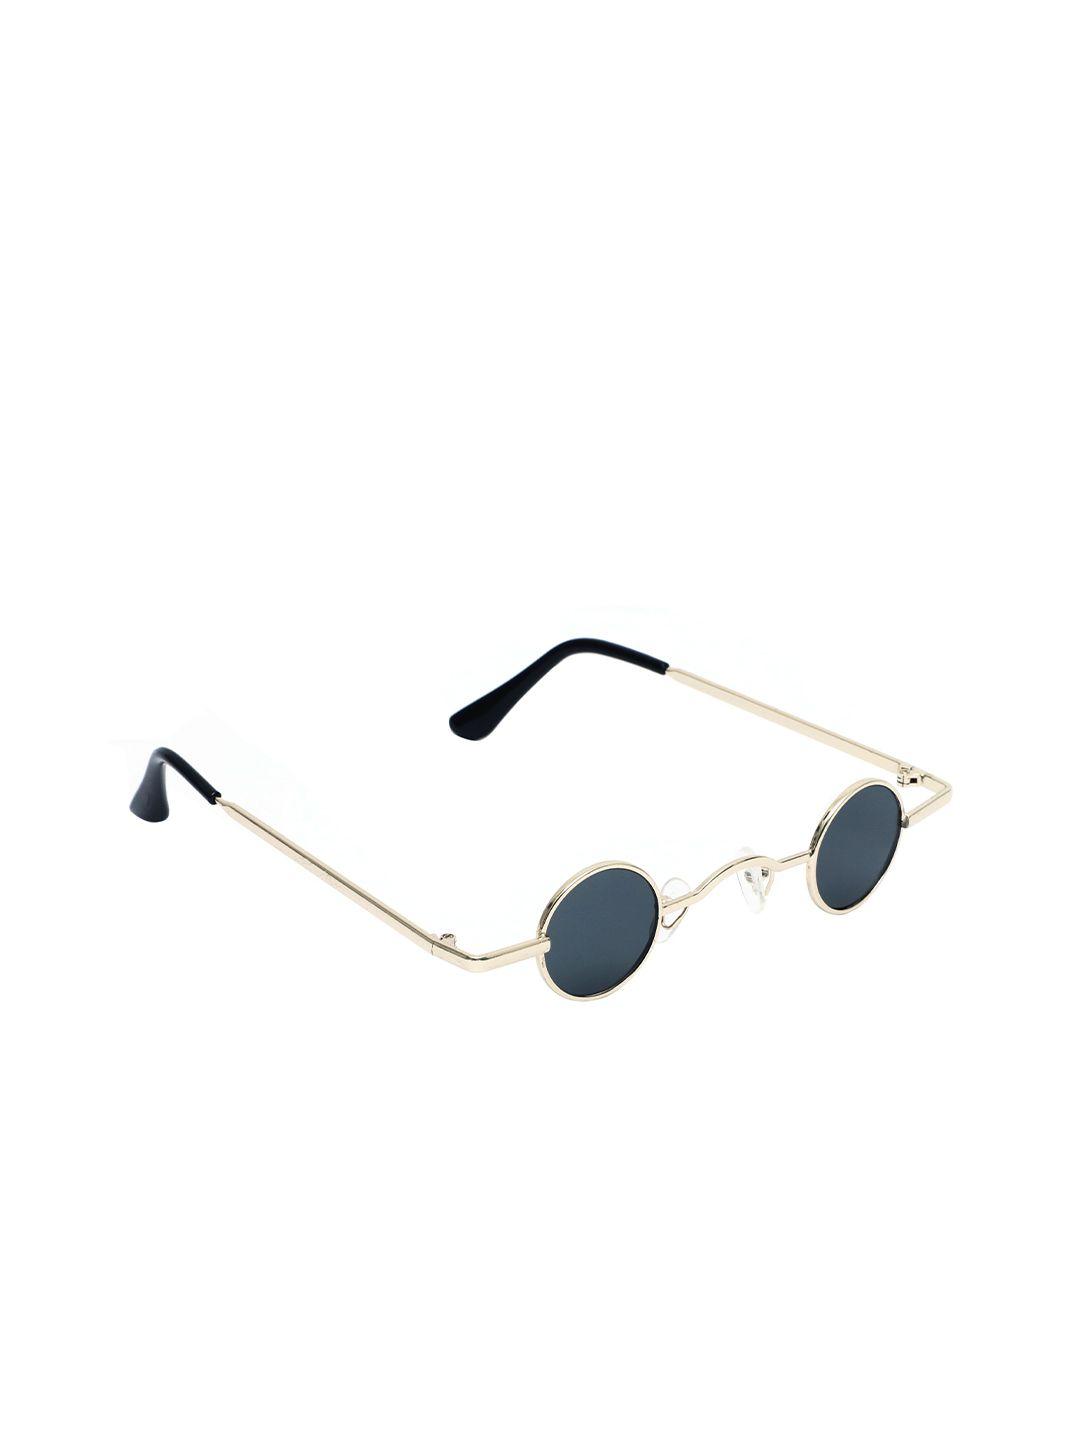 floyd unisex black lens & gold-toned round sunglasses with uv protected lens 71_gold_grey